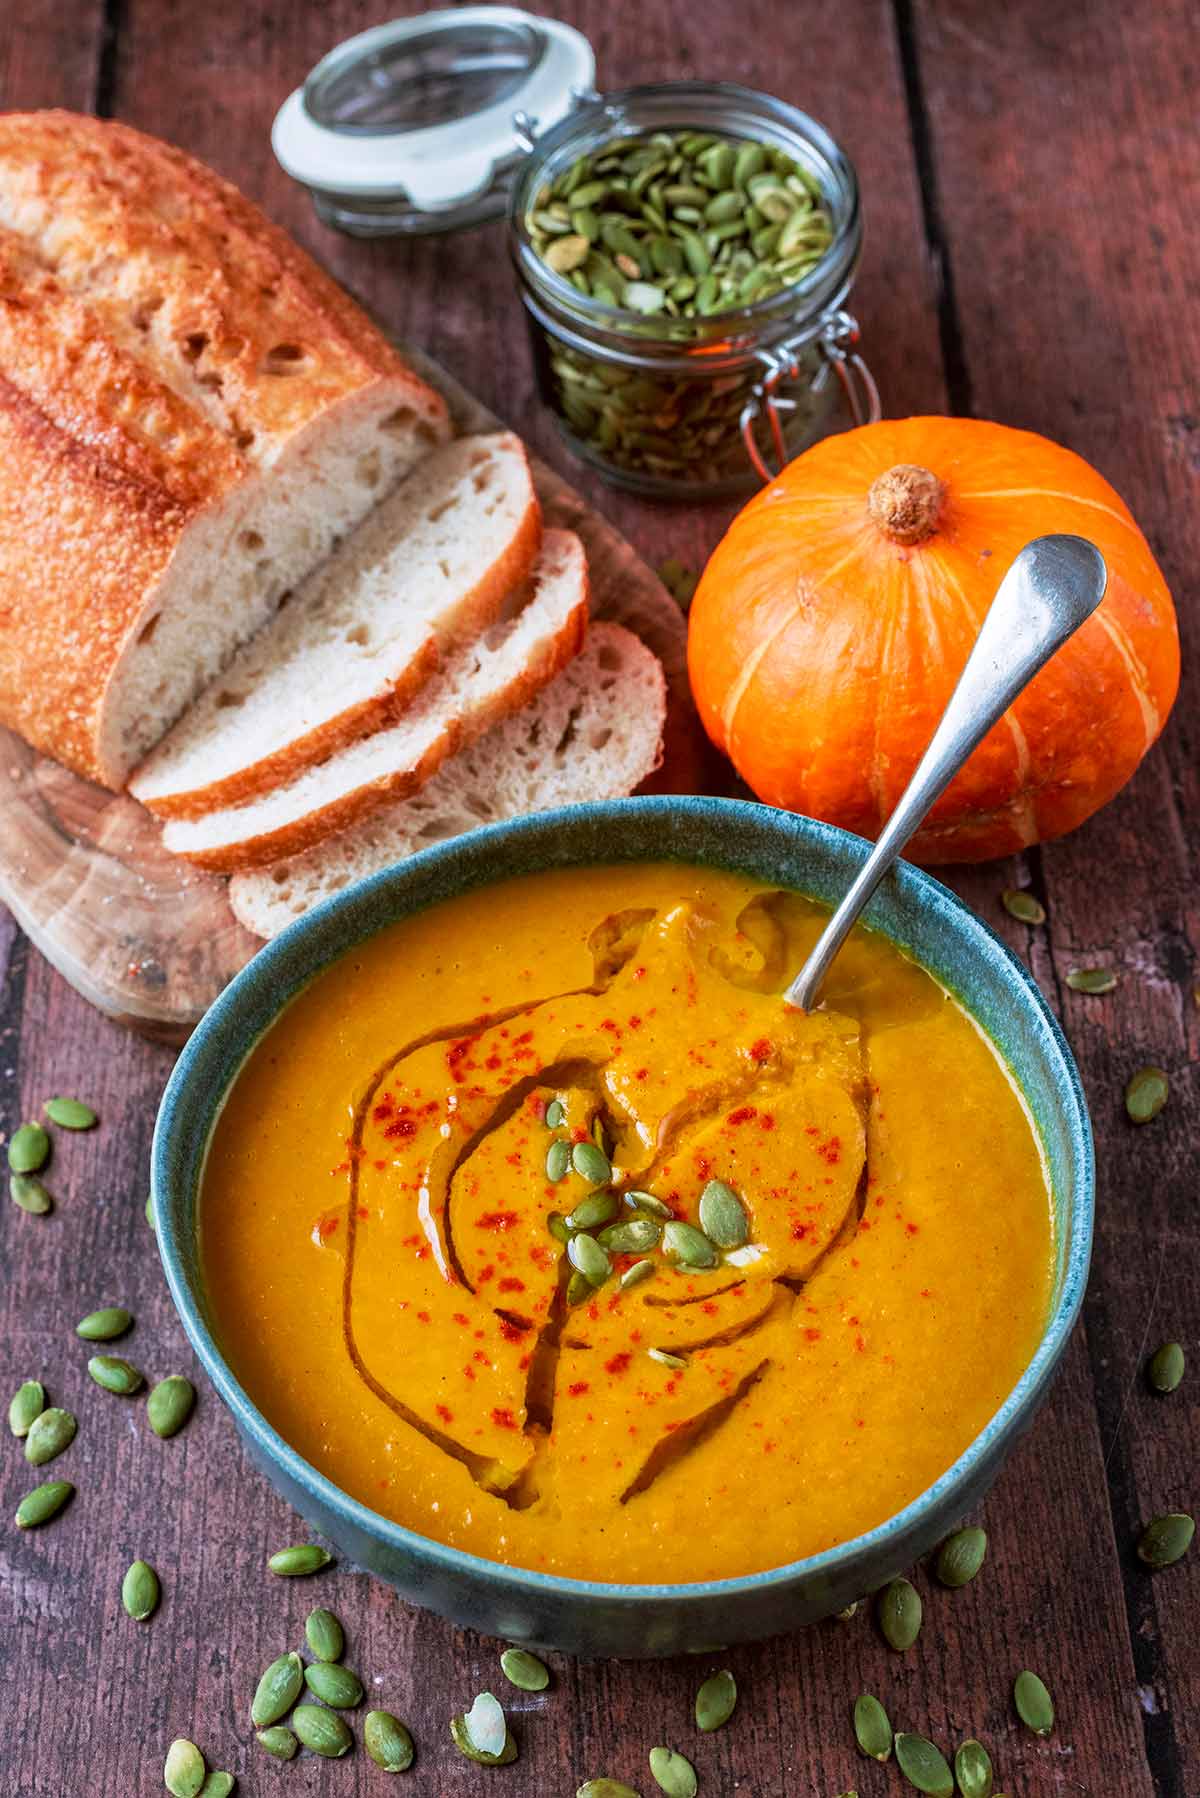 A bowl of pumpkin soup in front of a pumkin, a jar of pumpkin seeds and some bread.